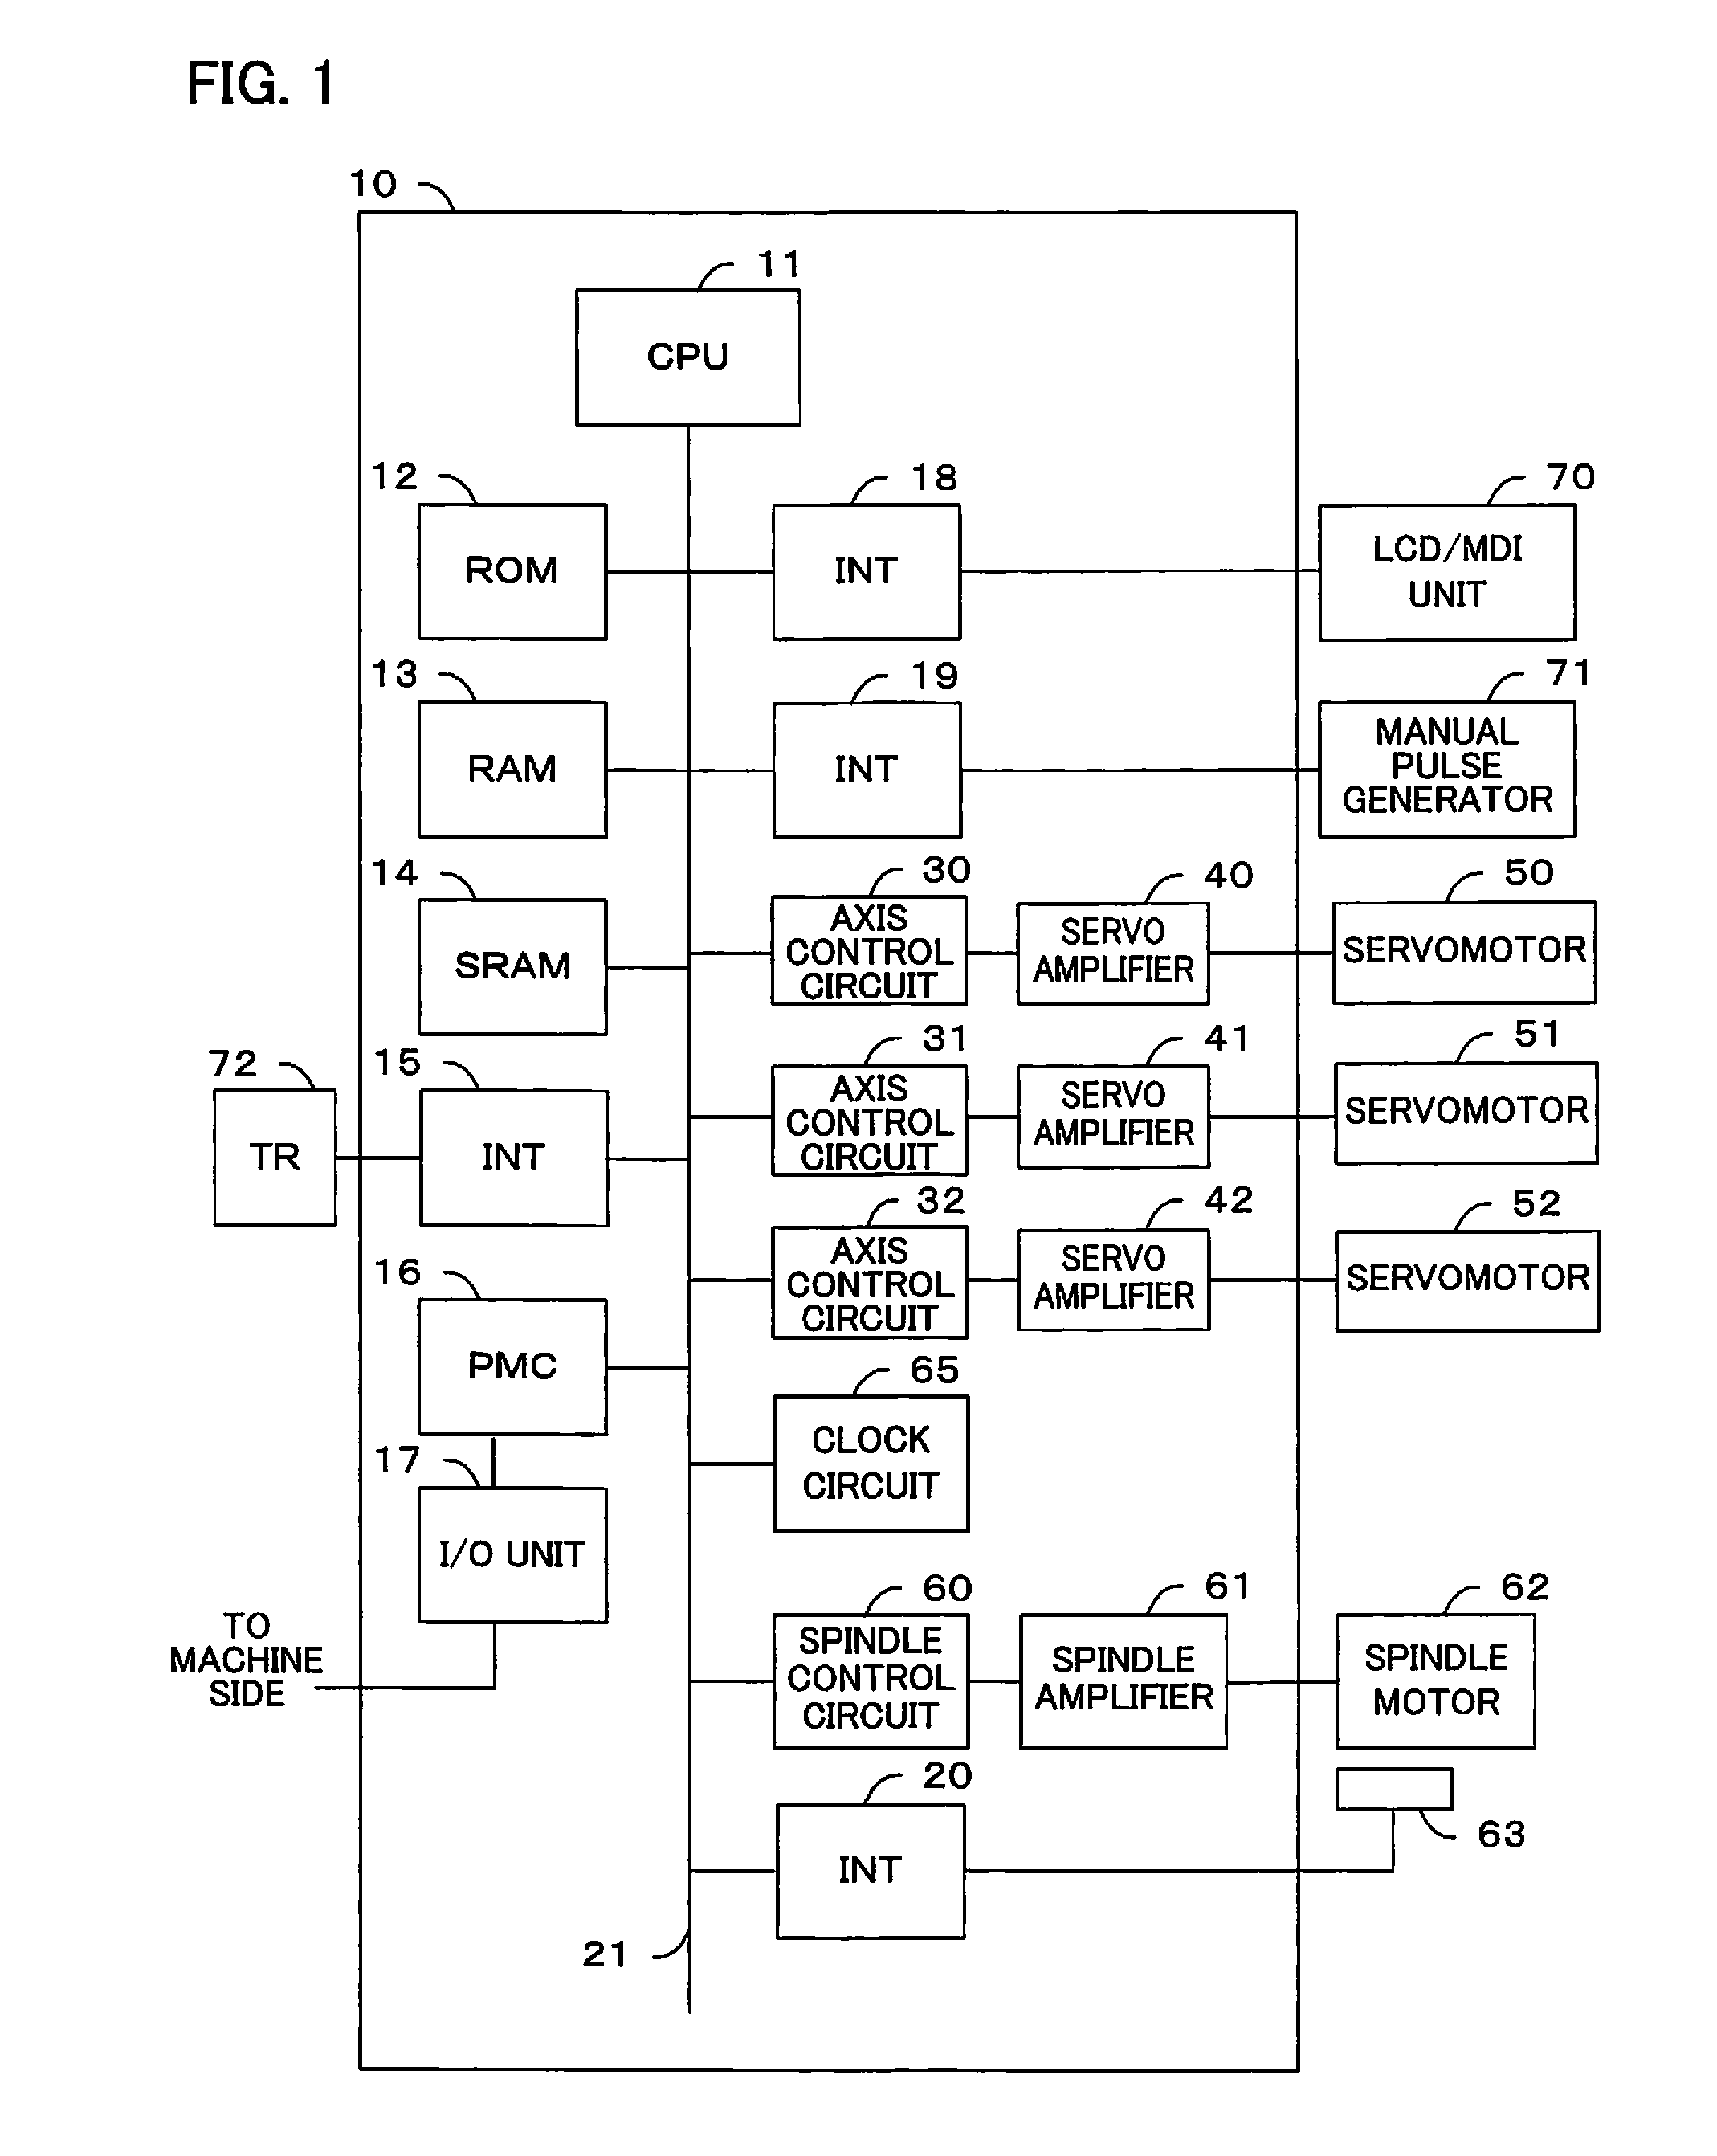 Controller for machine tool